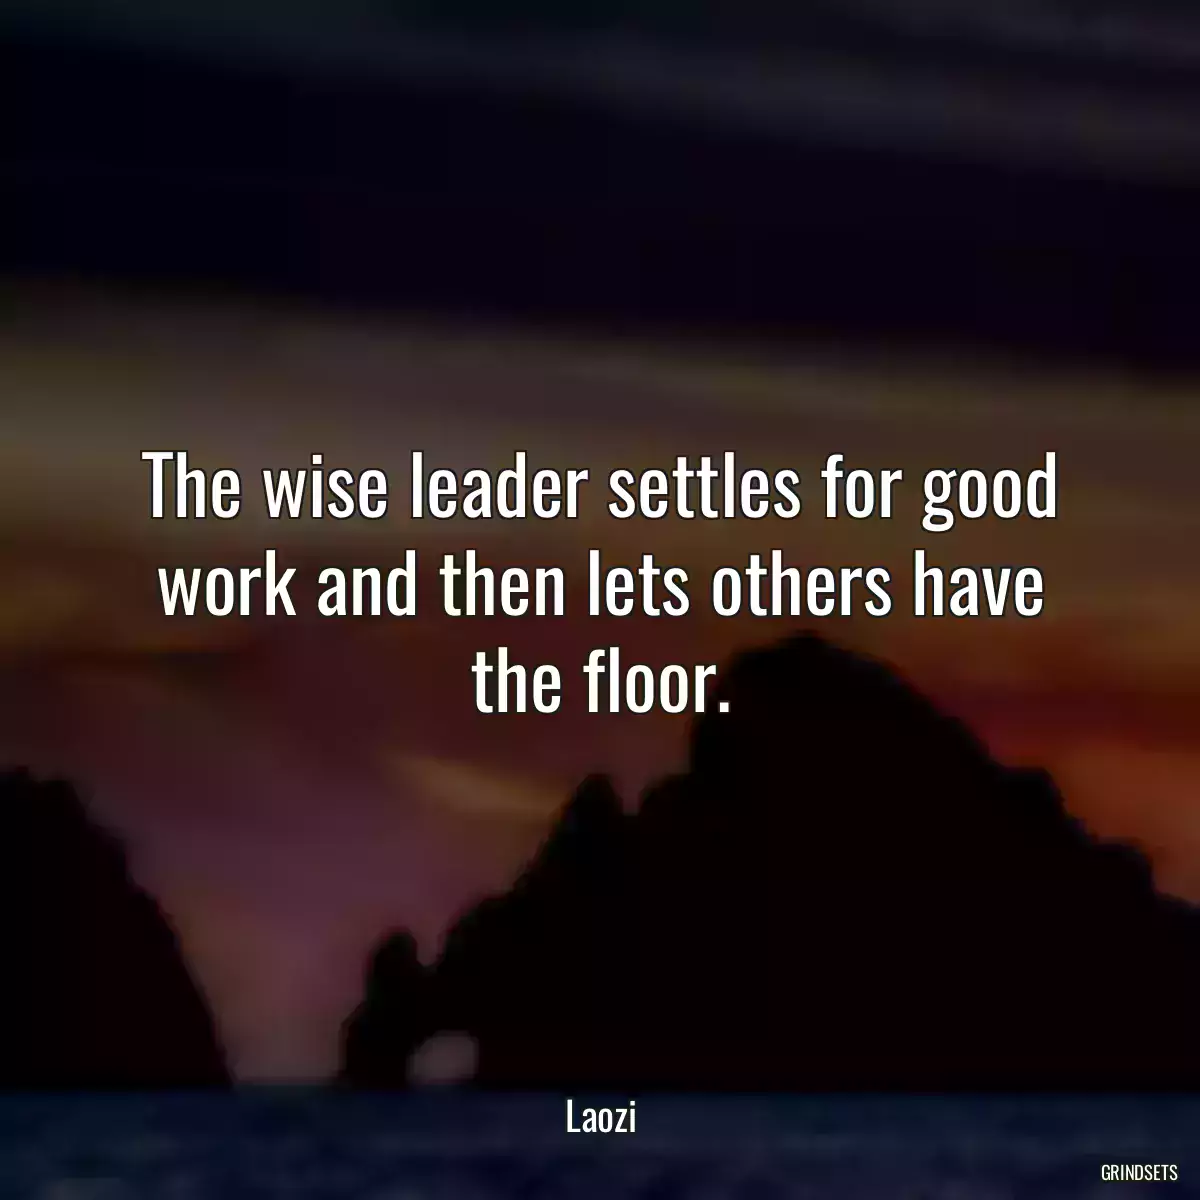 The wise leader settles for good work and then lets others have the floor.